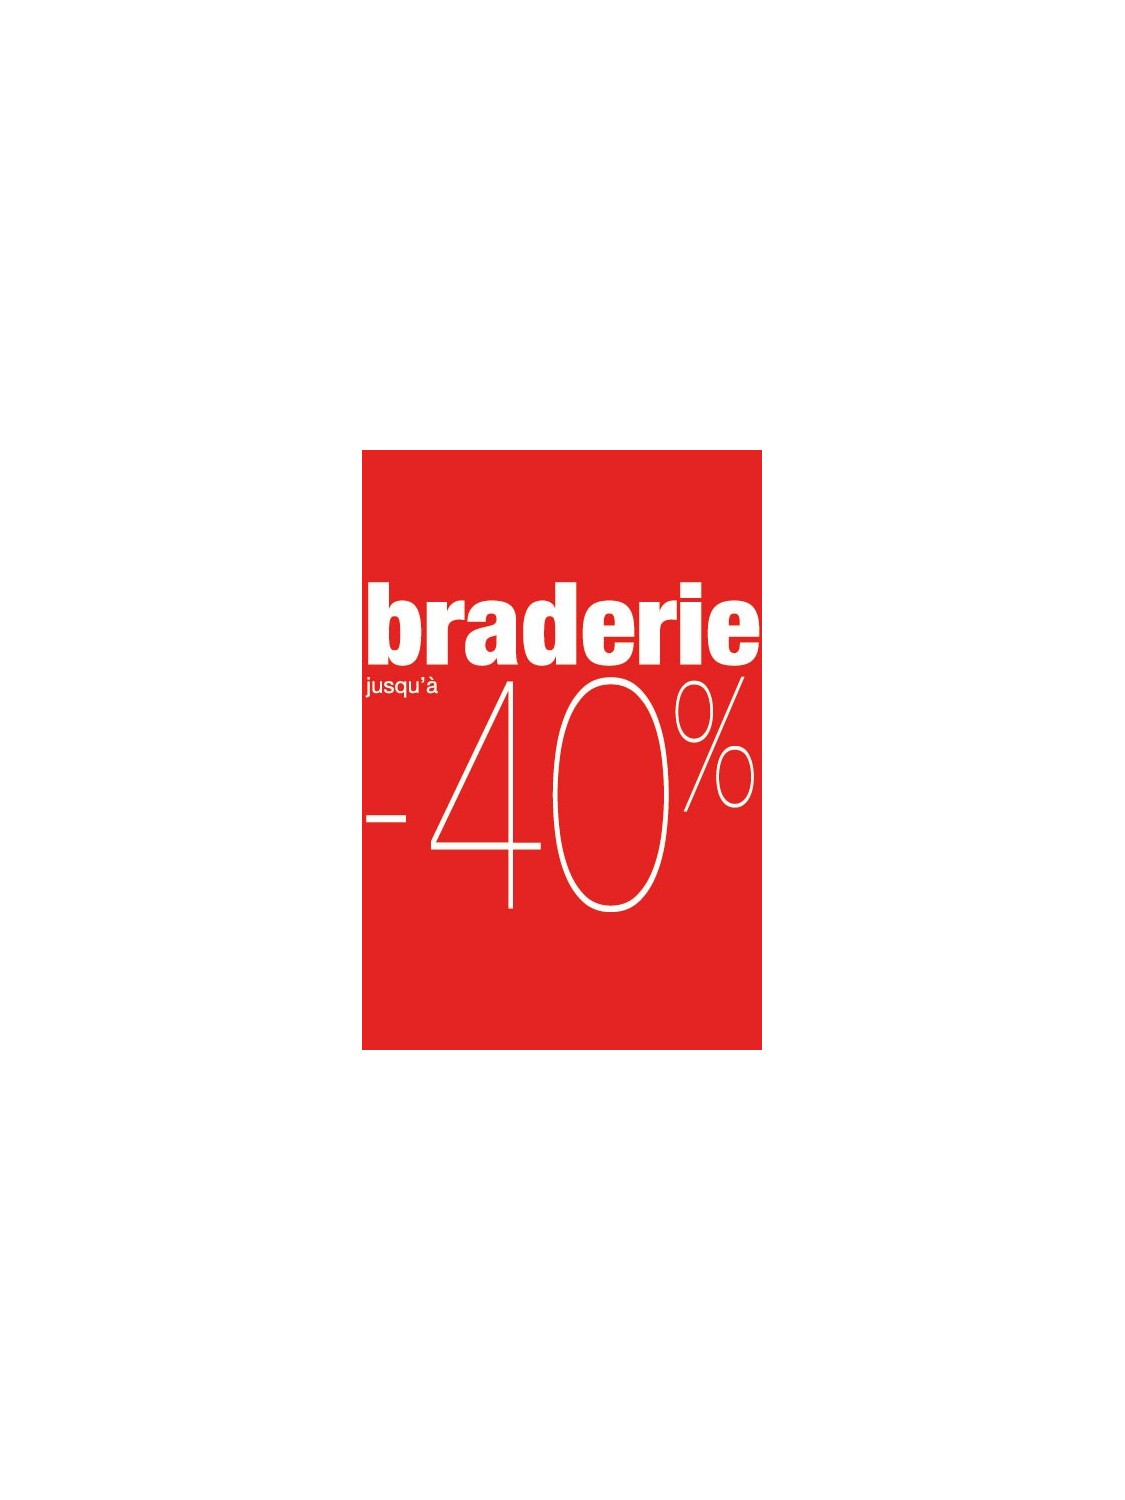 Affiche "braderie -40%" rouge